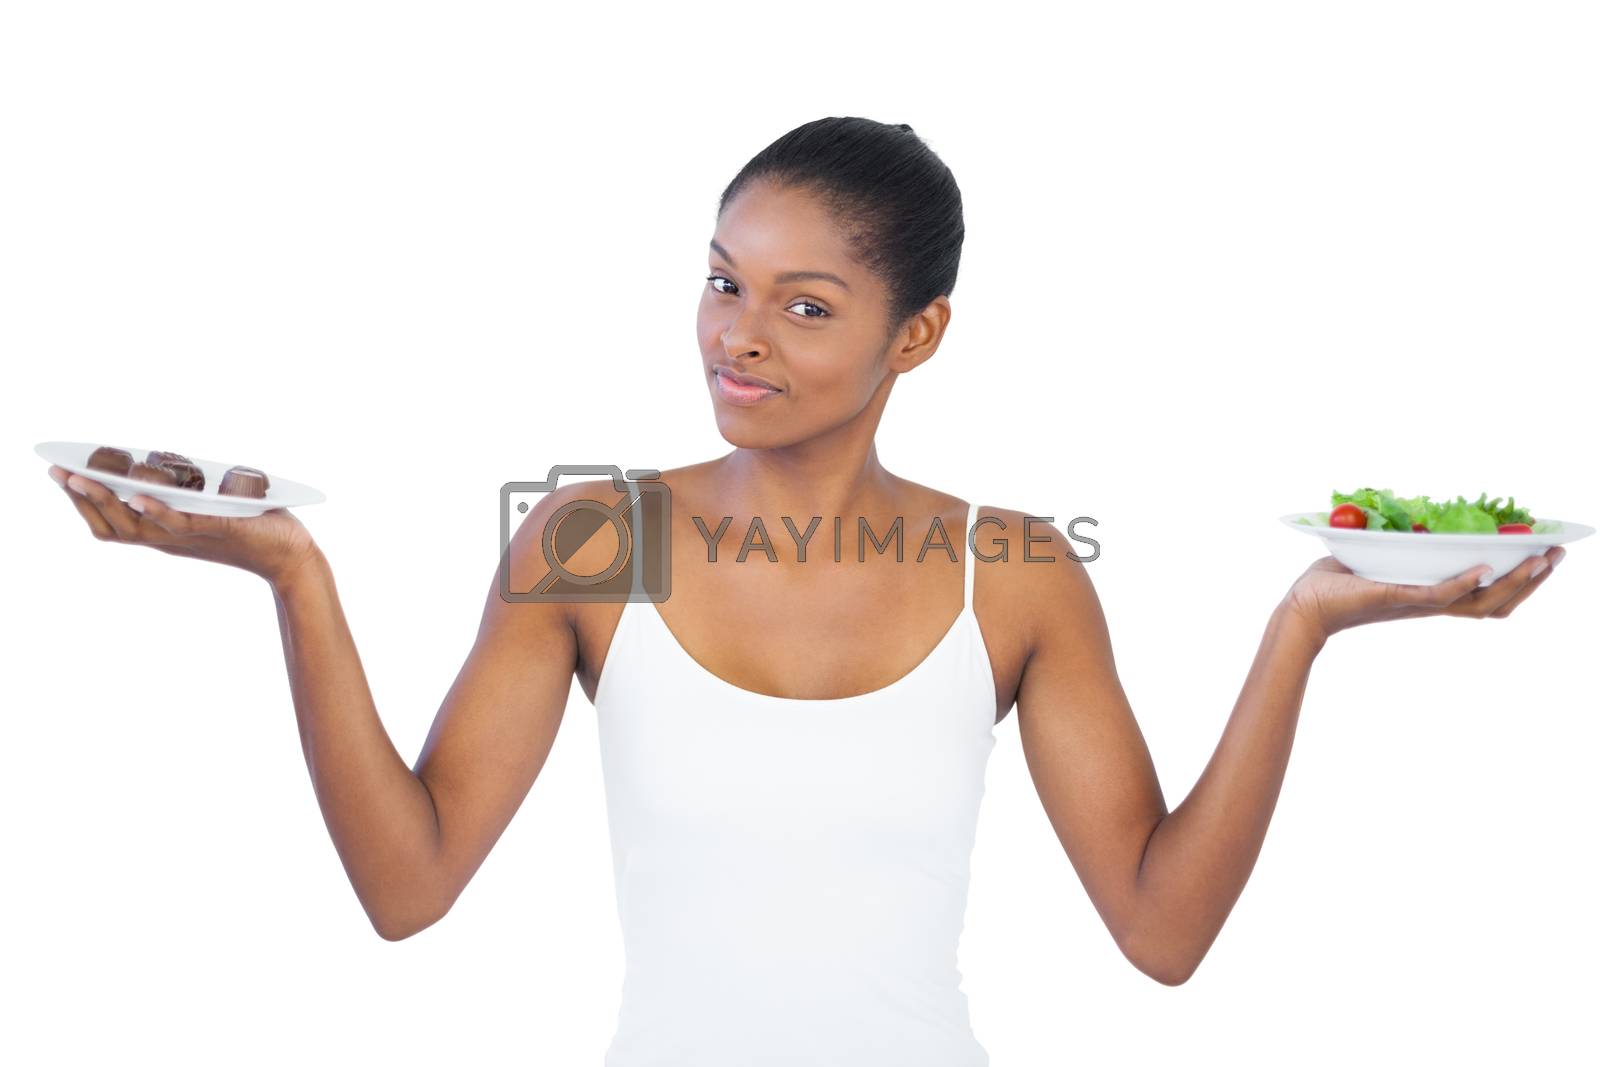 Royalty free image of Pretty woman deciding to eat healthily or not by Wavebreakmedia